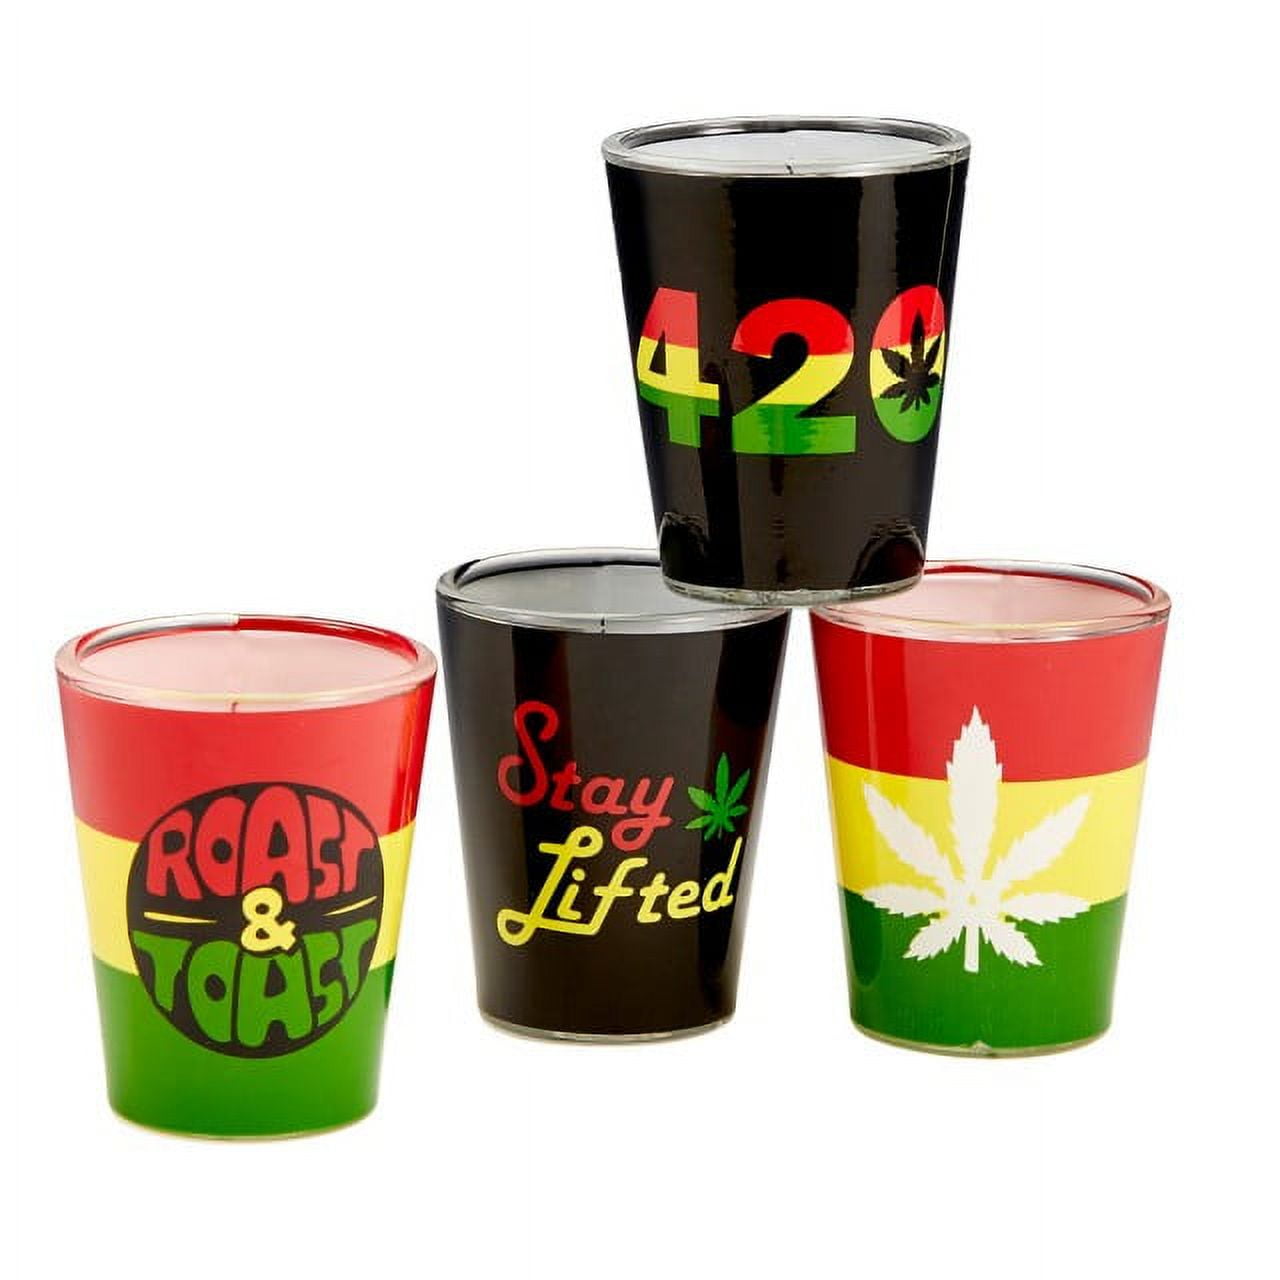 20 MINI-ME 2 ounce RED PARTY CUPS small Plastic shot glass bar cup HEFTY